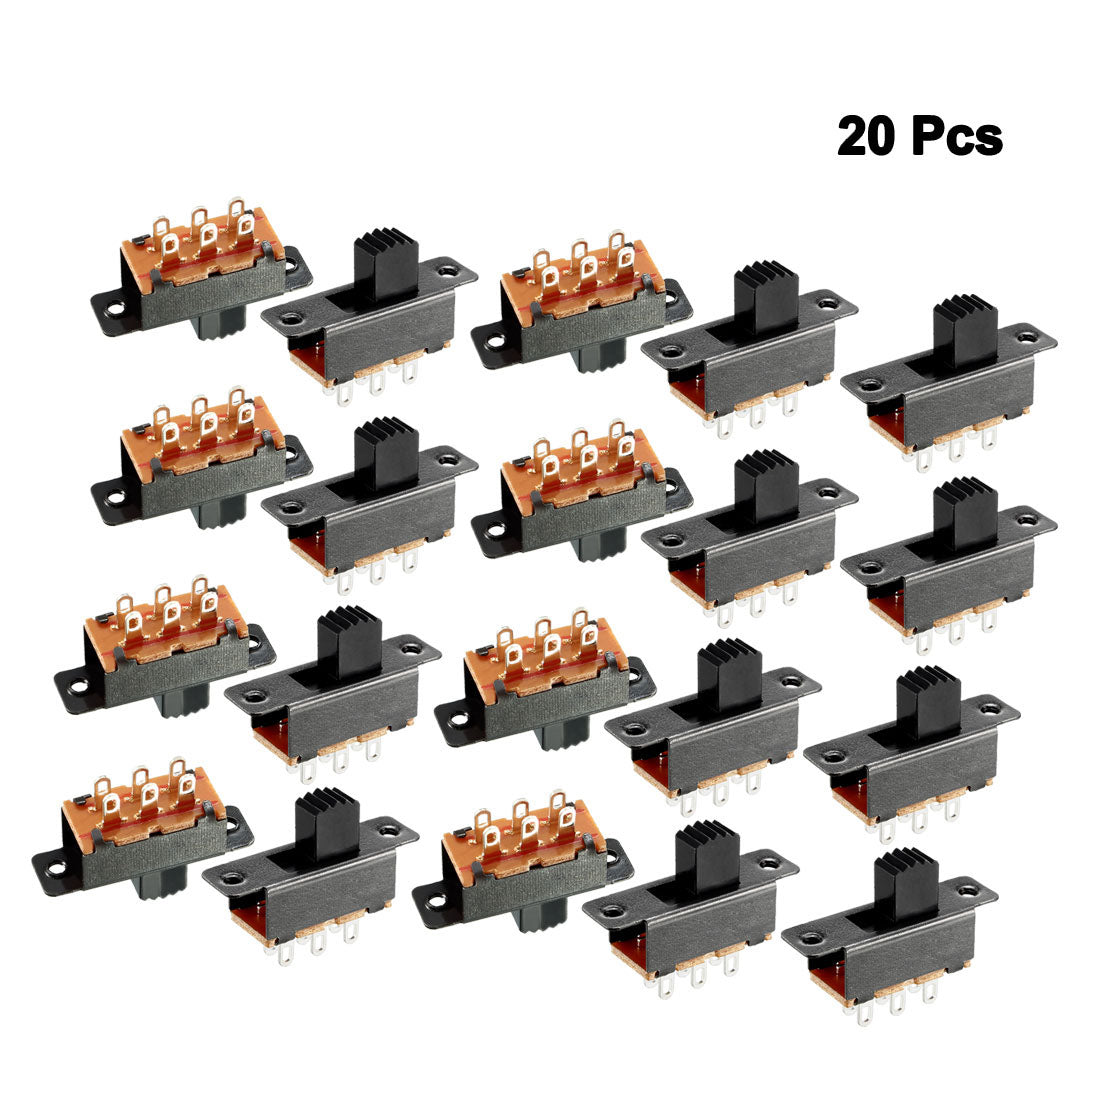 uxcell Uxcell 20Pcs 6mm Vertical Slide Switch DPDT 6 Terminals PCB Panel Latching